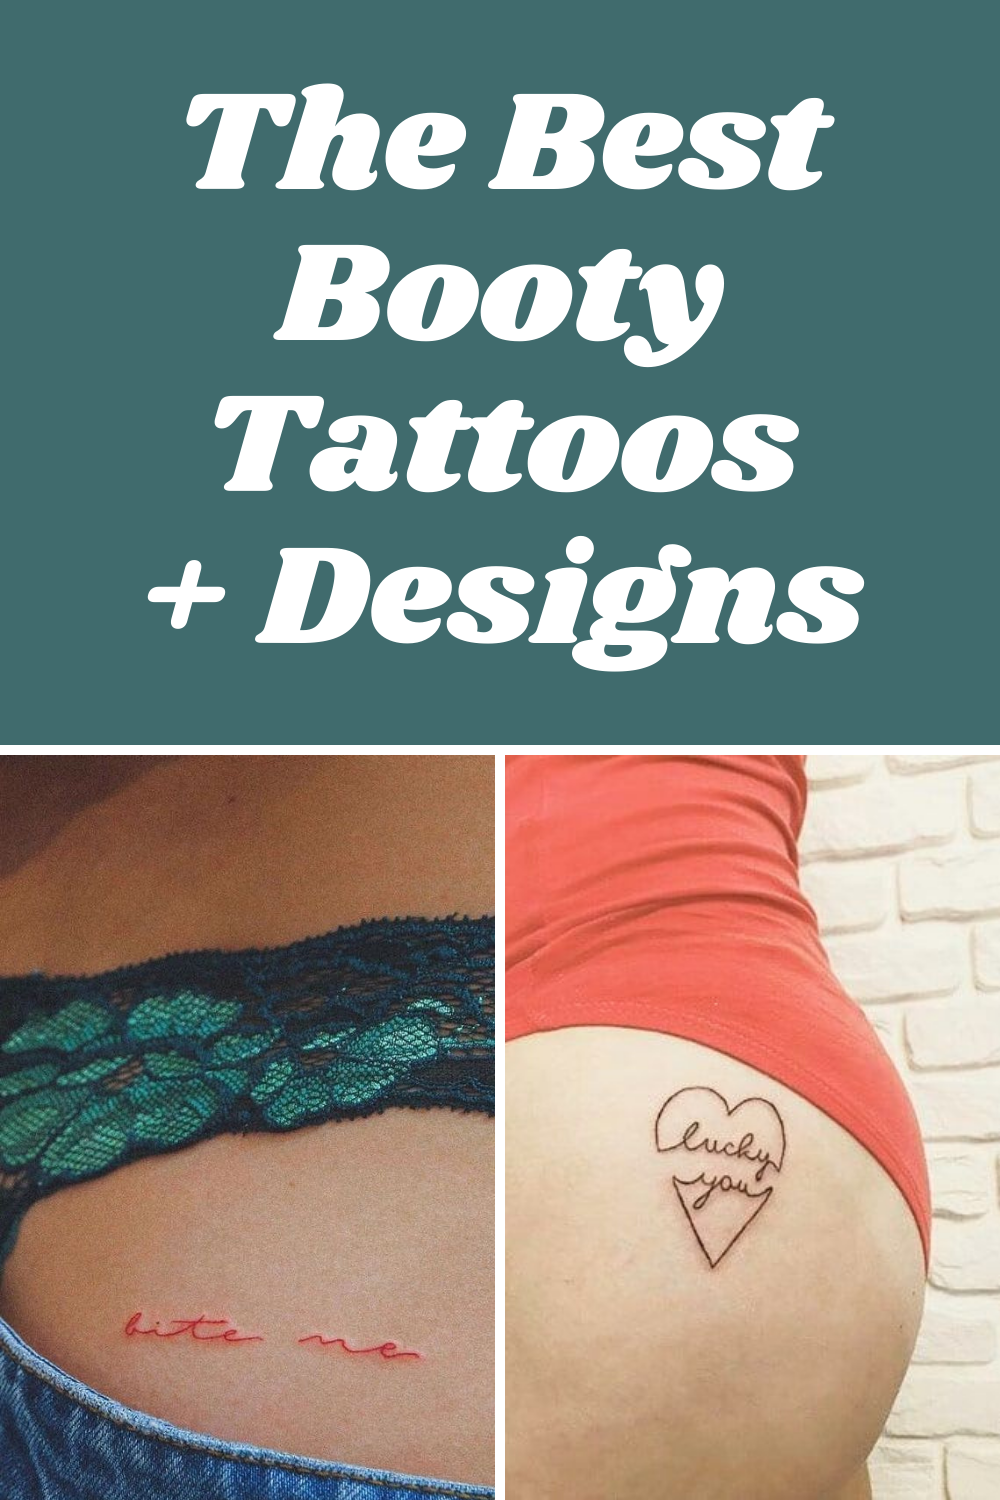 banks joseph recommends Funny Tattoos To Get On Your Bum